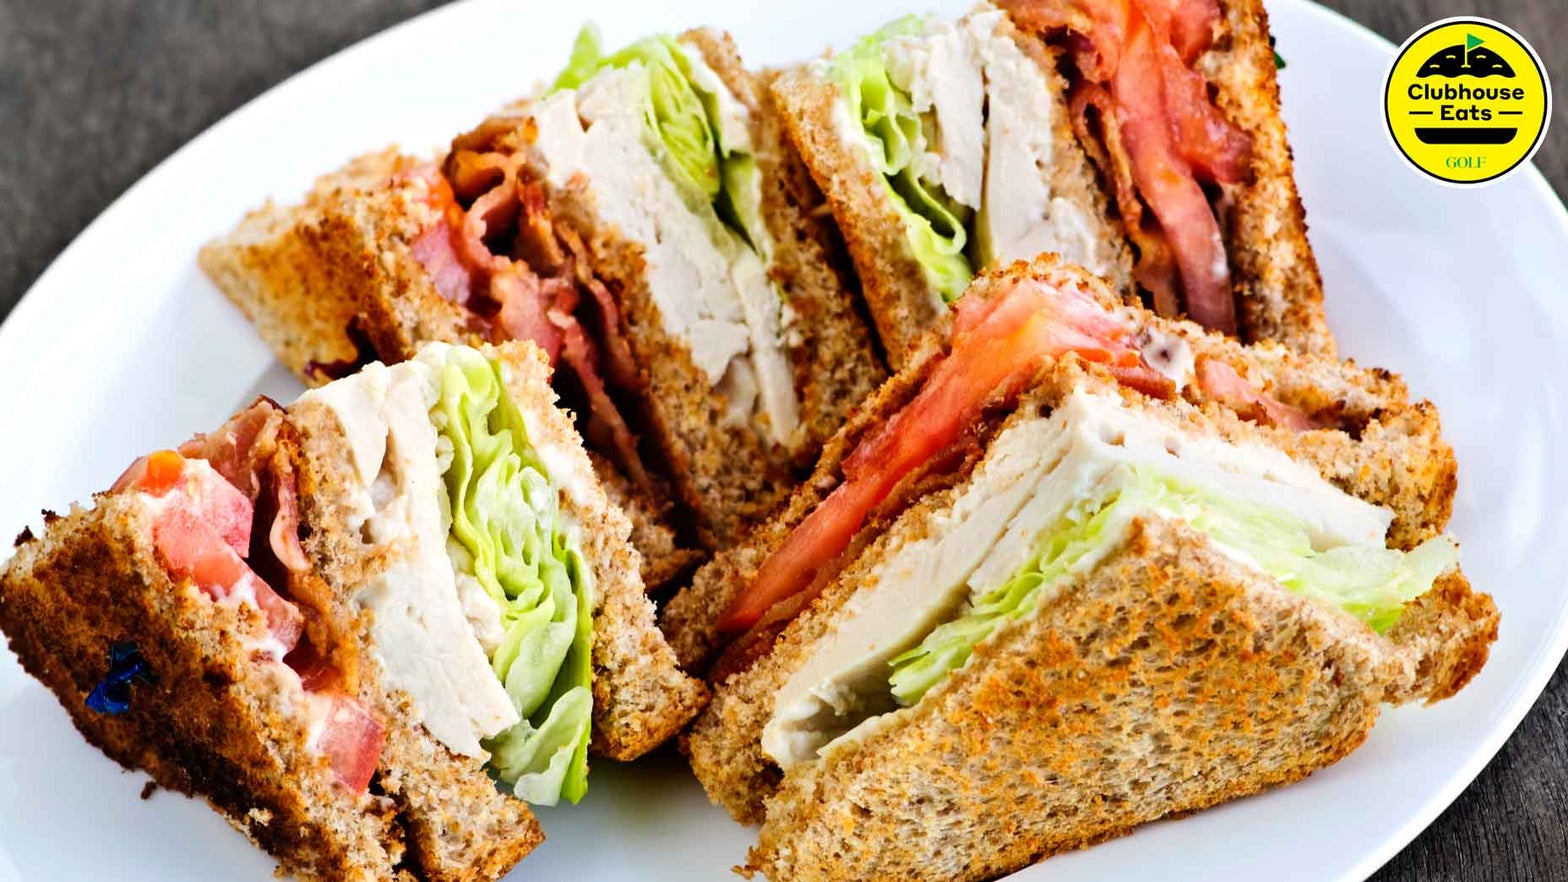 The secret to making a perfect club sandwich, according to a golf-club chef